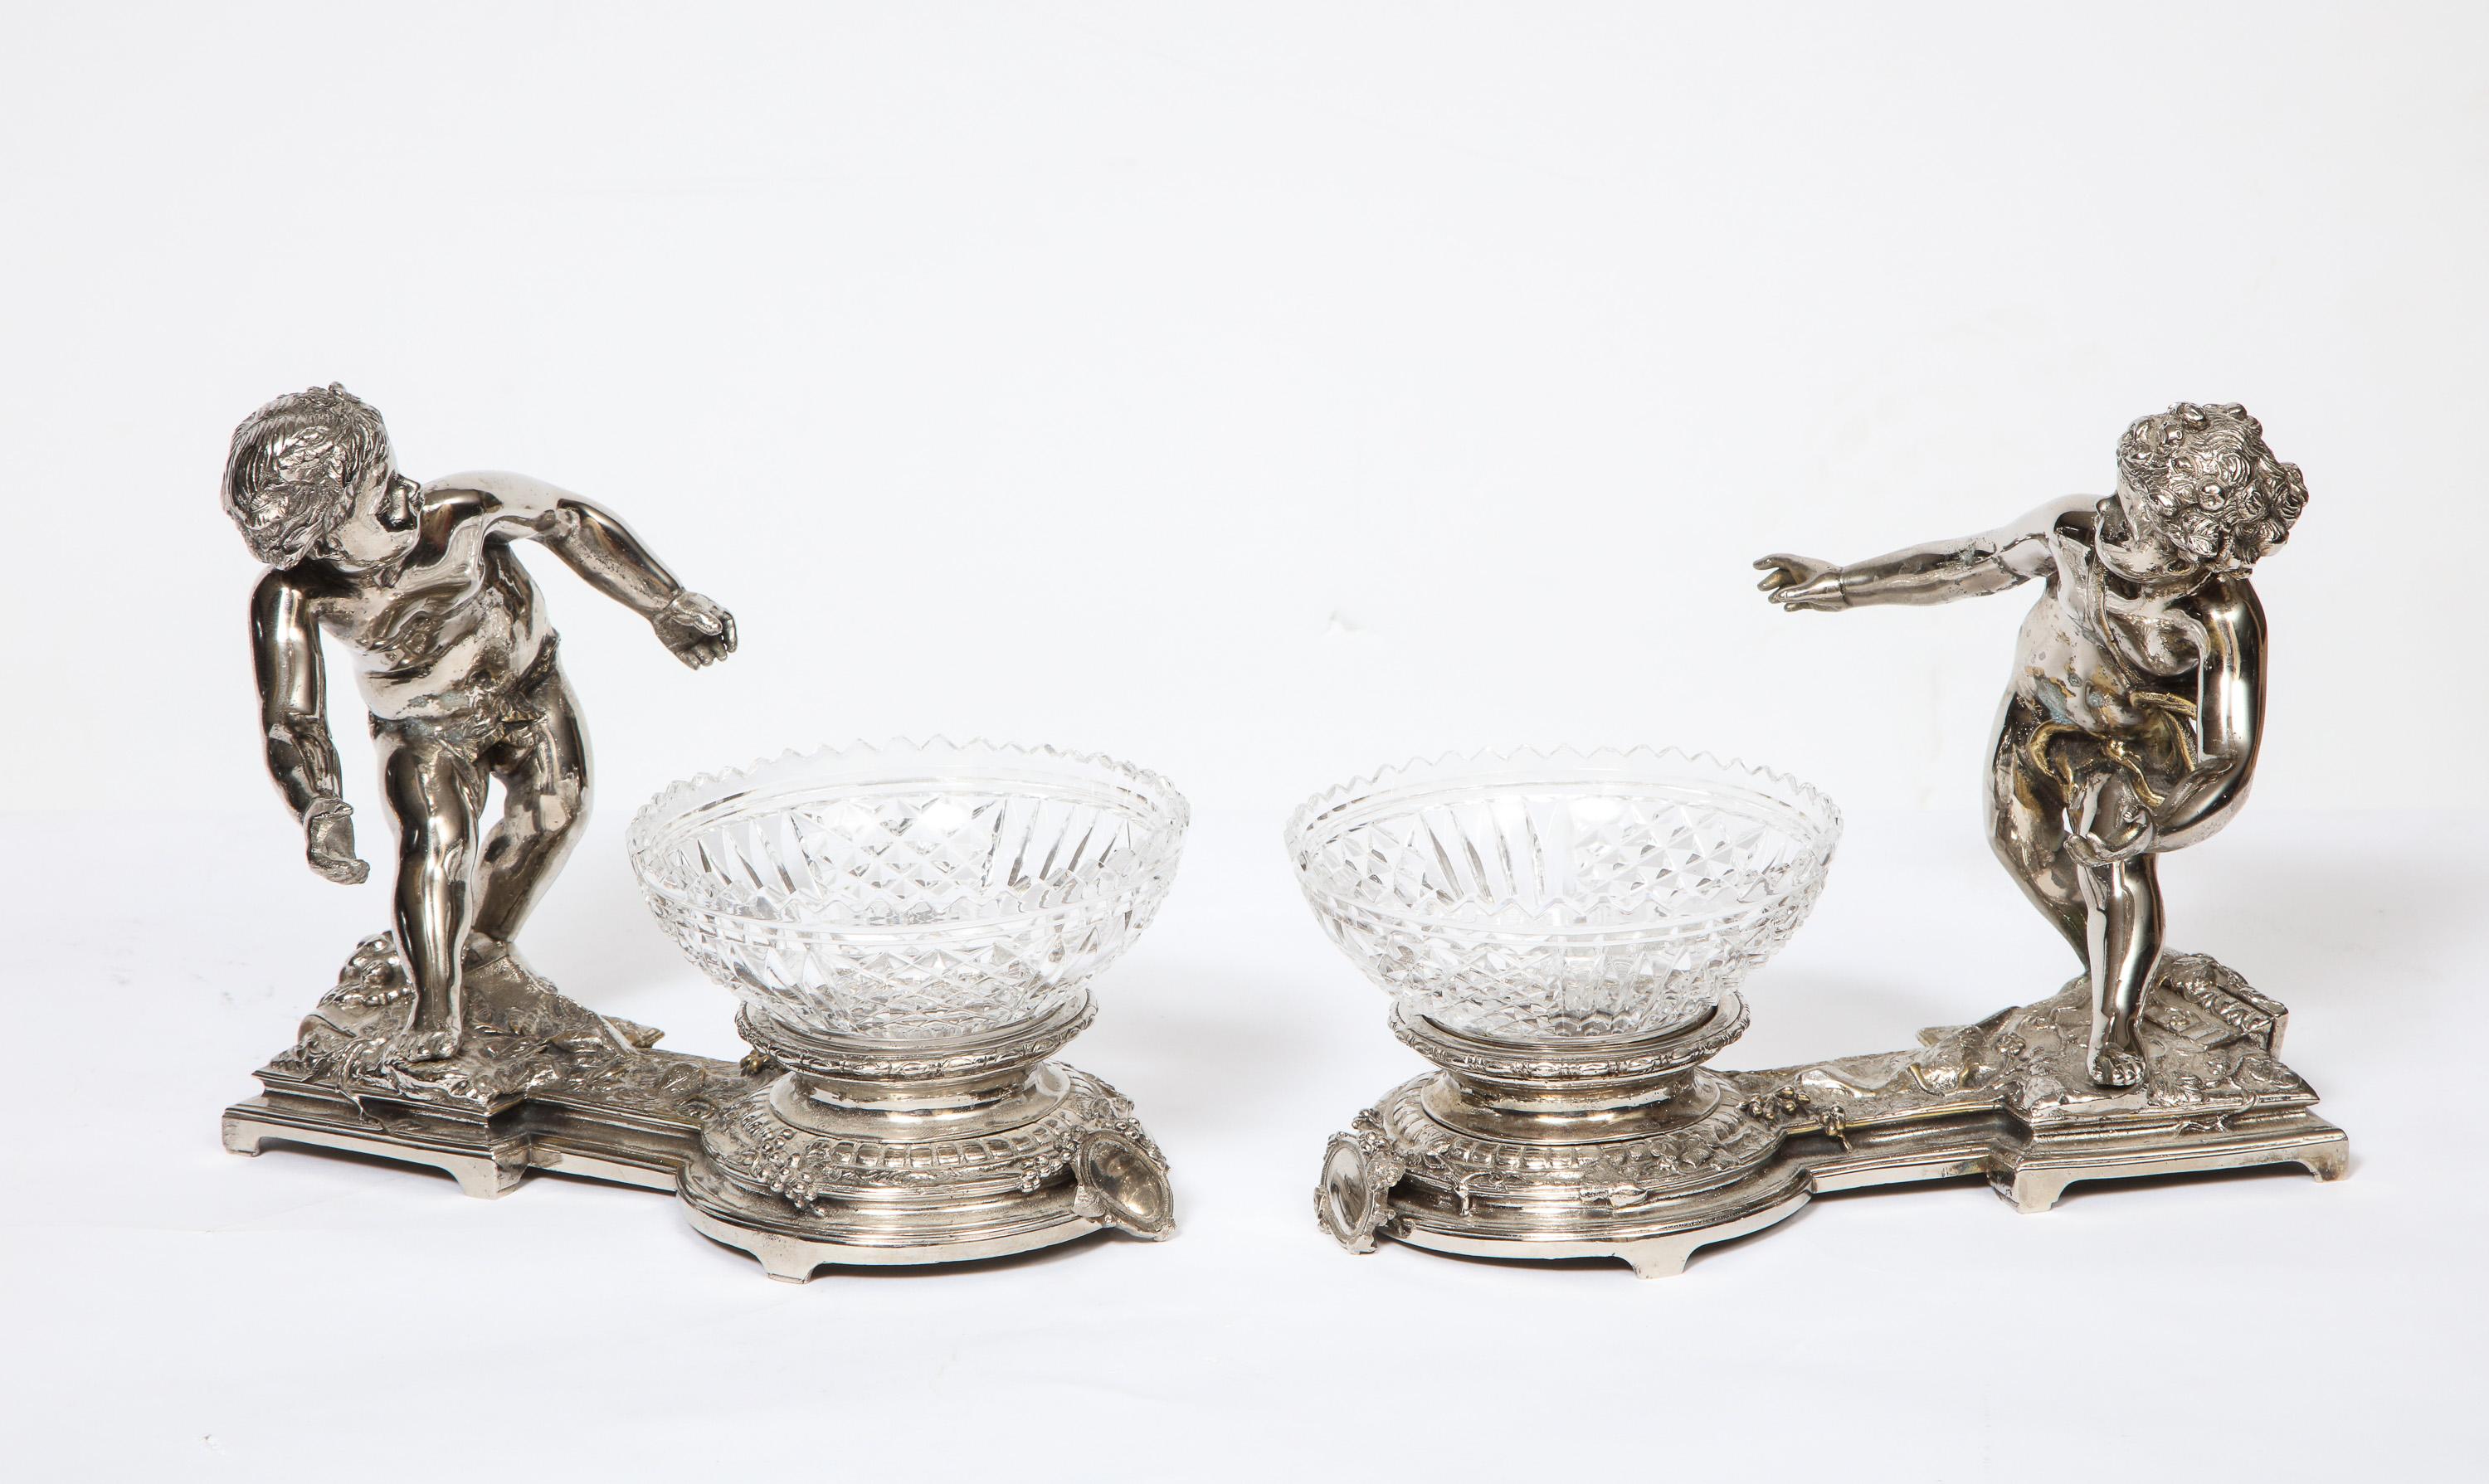 Pair of French silvered bronze and glass centerpieces with cherubs, attributed to Chirstofle, Paris.

Very charming pair of centerpieces / candy dishes and very good quality - would look good on any table.

Measures: 7